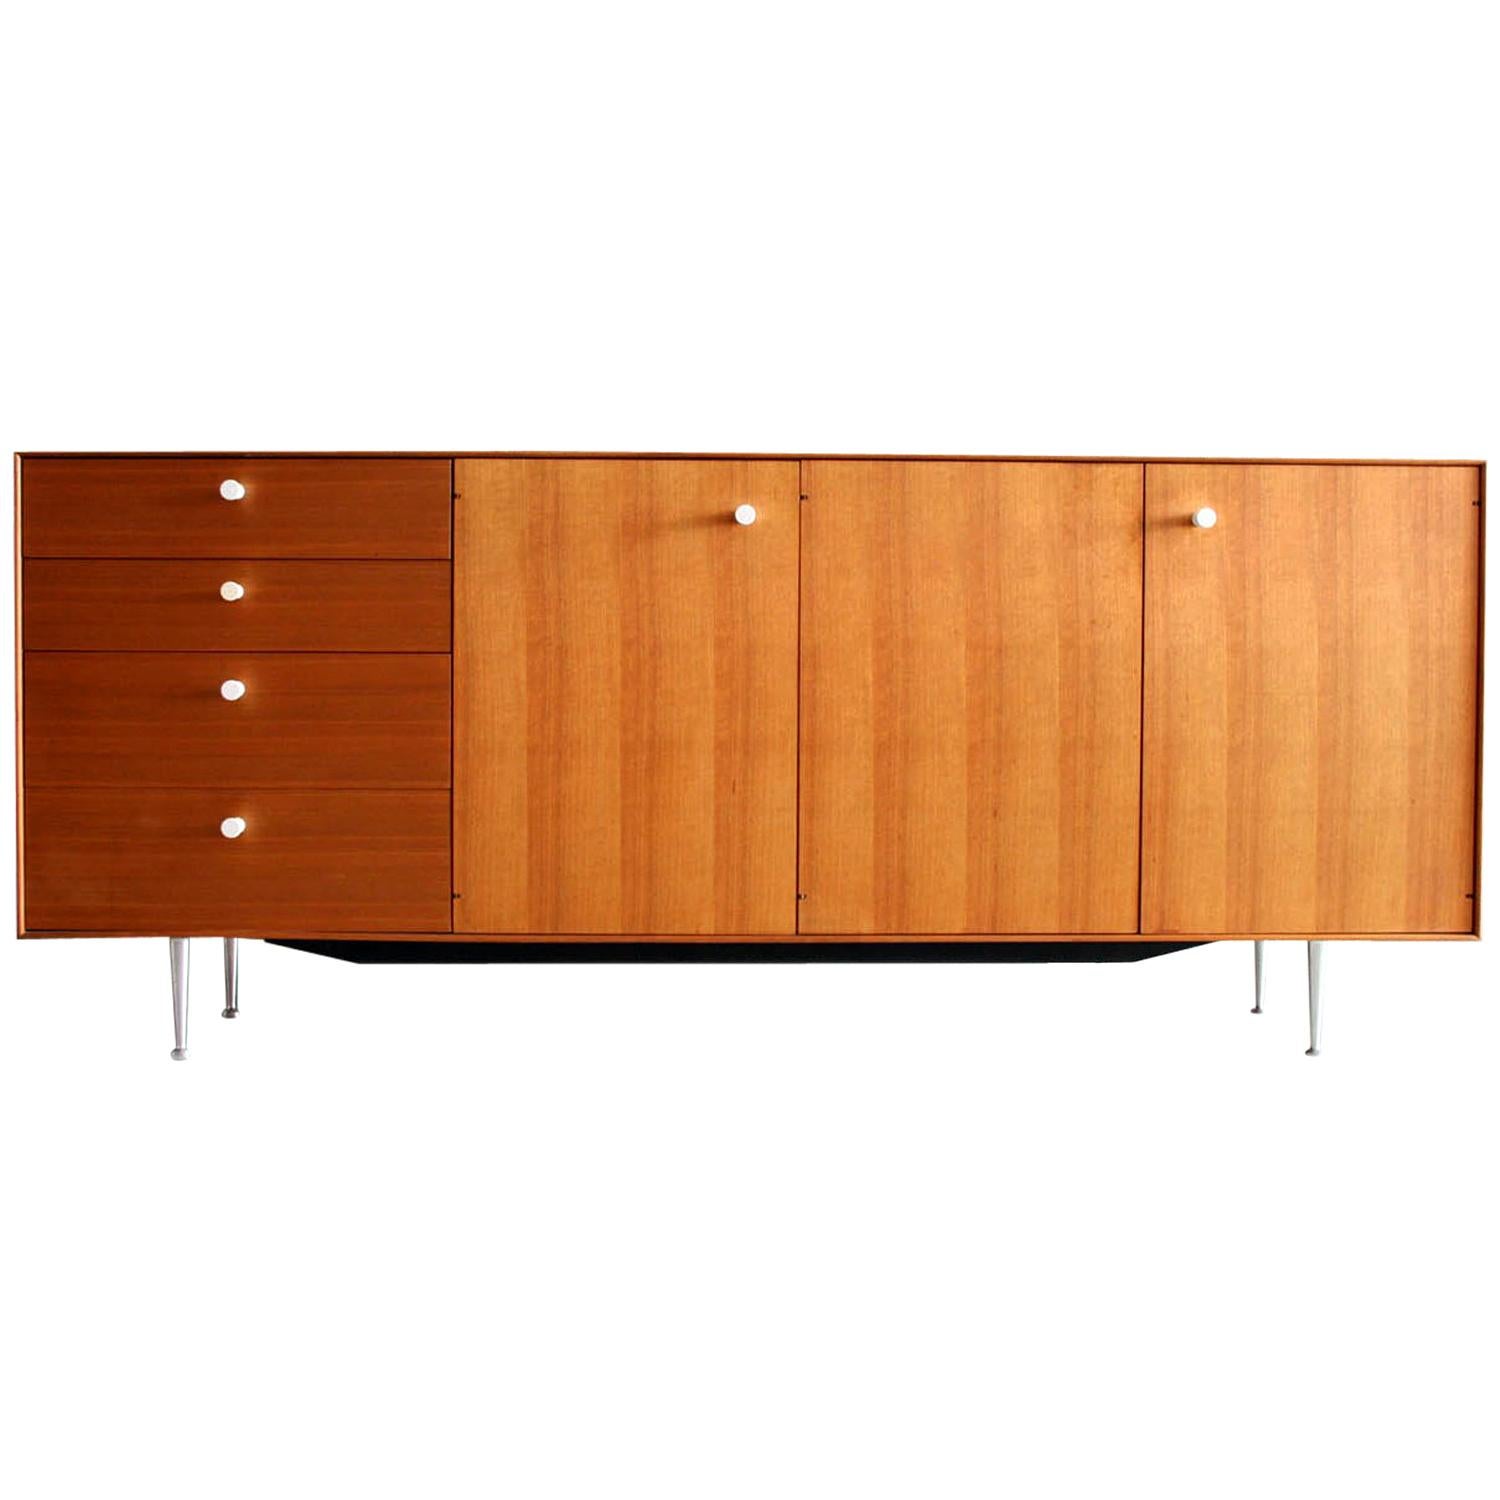 Thin Edge Cabinet or Credenza by George Nelson for Herman Miller